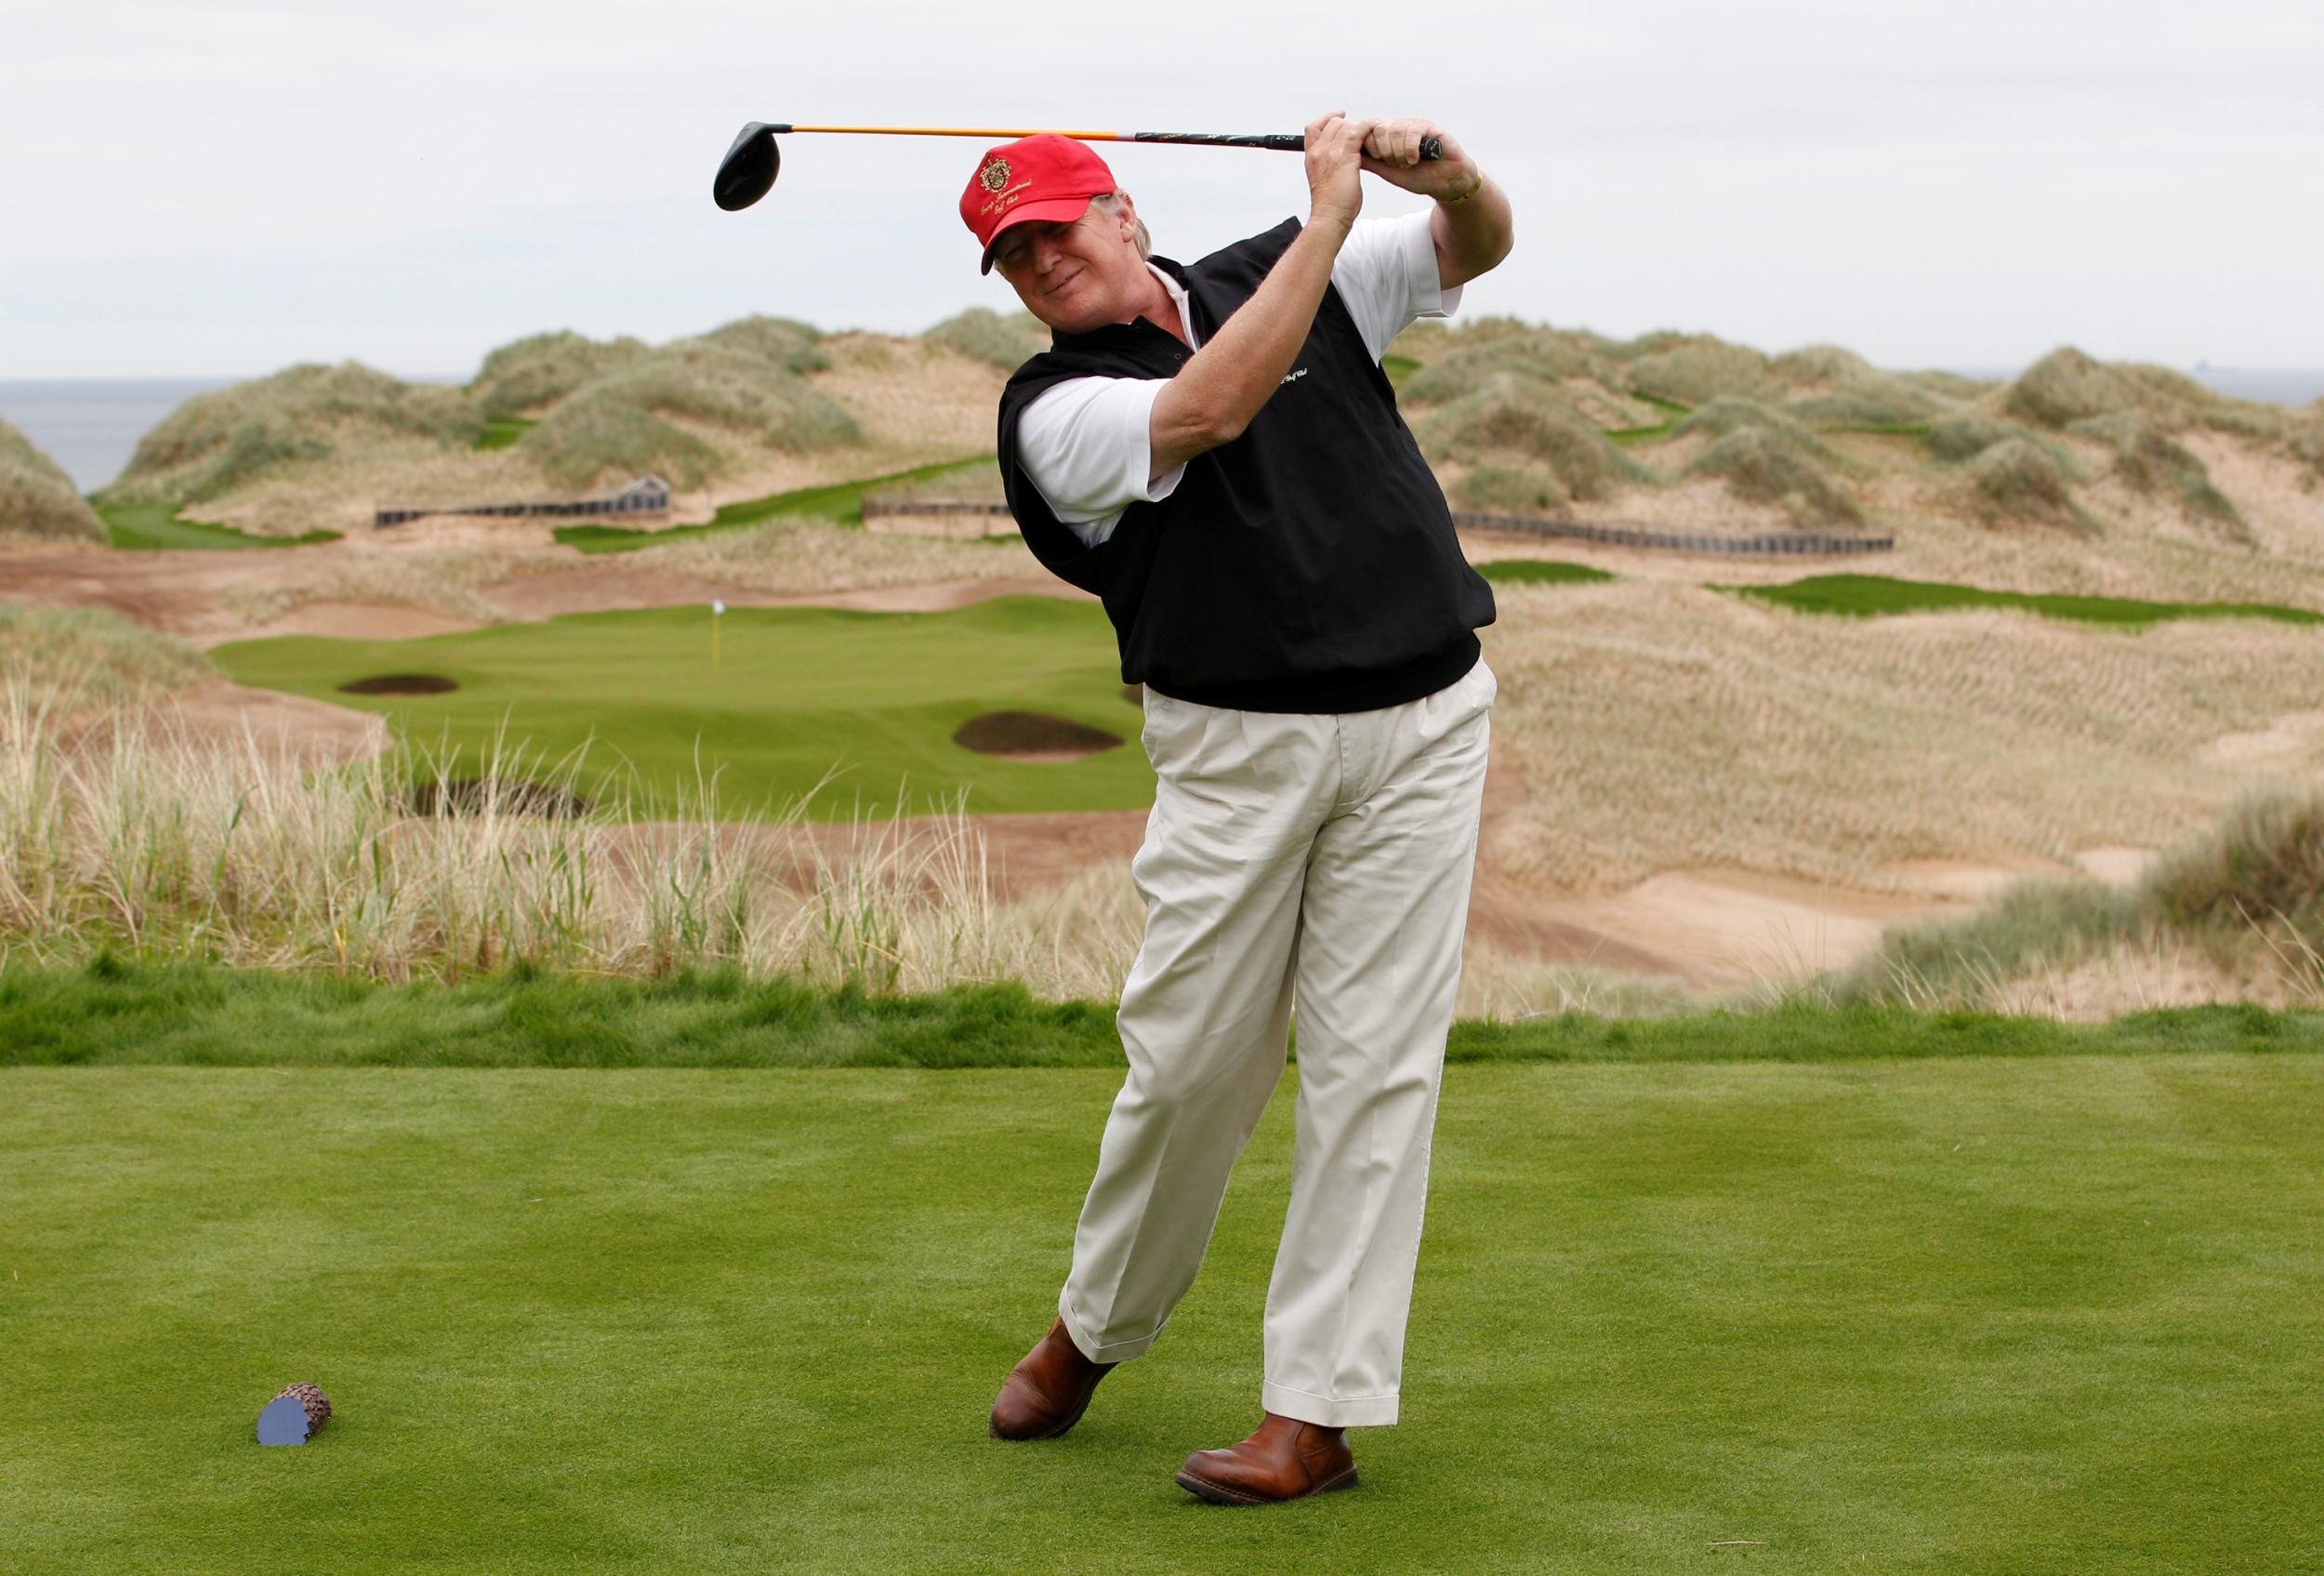 Donald Trump practices his swing at the Trump International Golf Links course on the Menie Estate near Aberdeen, Scotland